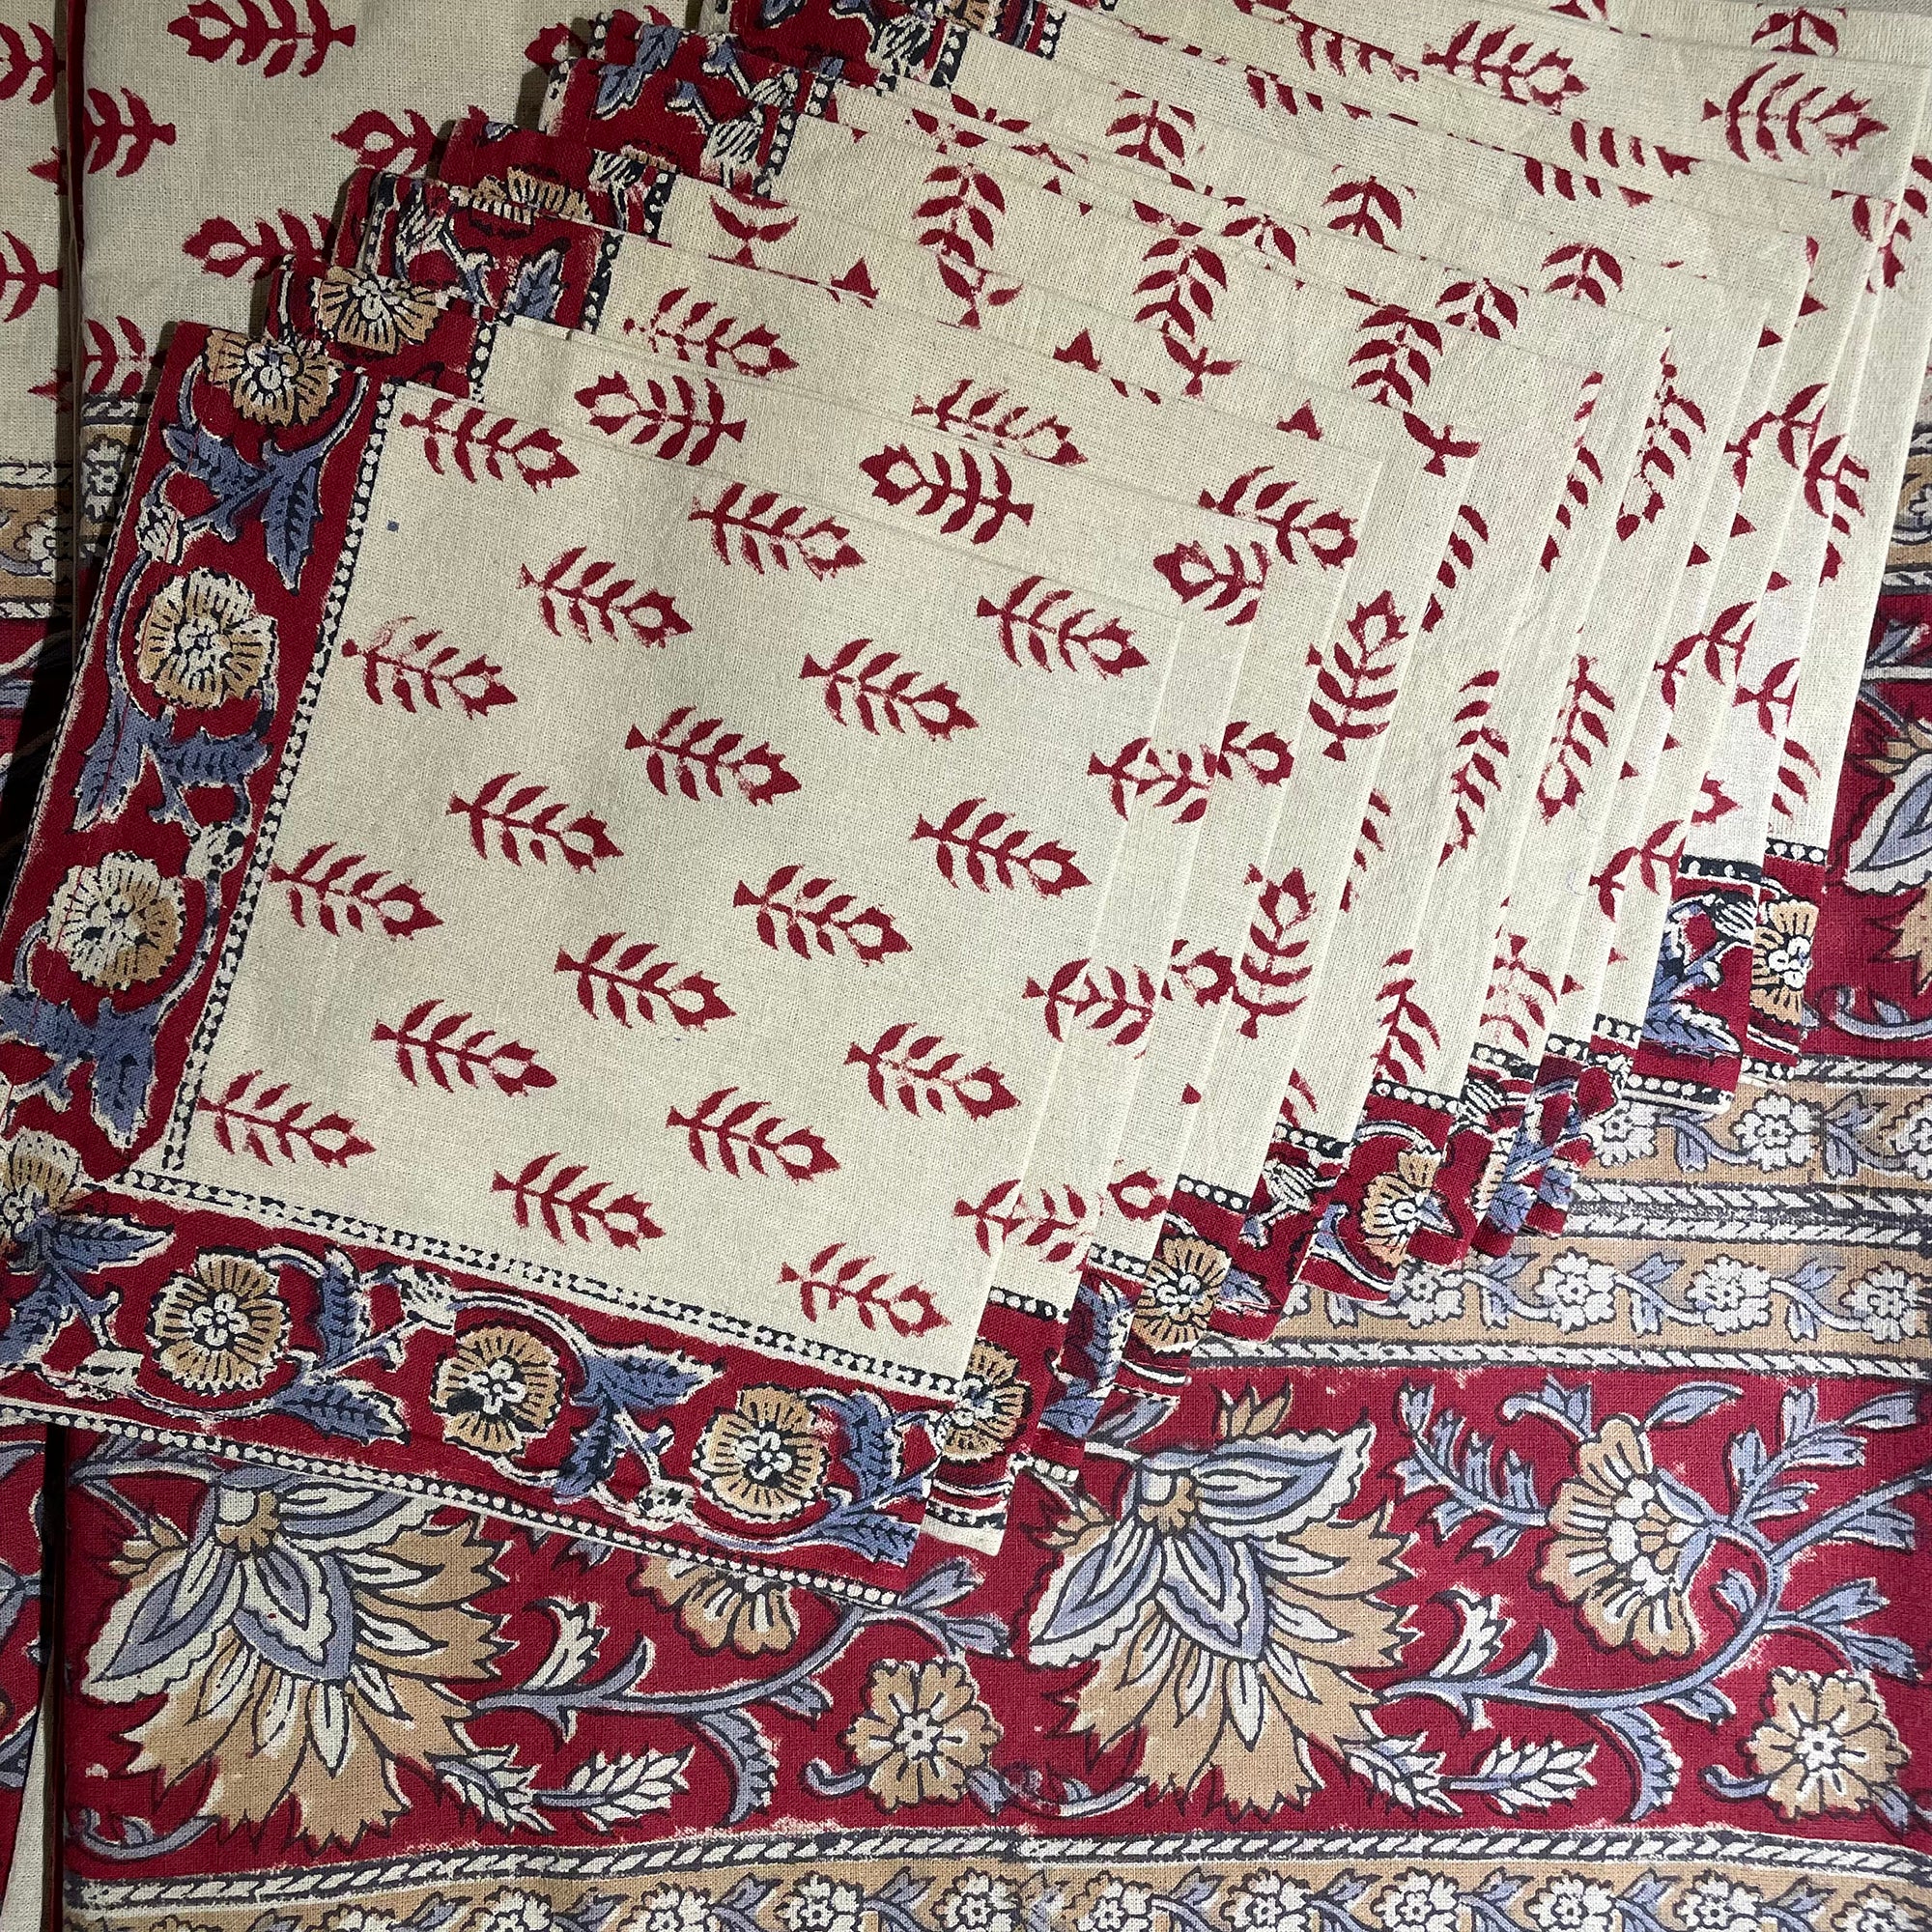 AR Blockprint Tablecloth with 12 Napkins-Red & Tan - Vintage India NYC